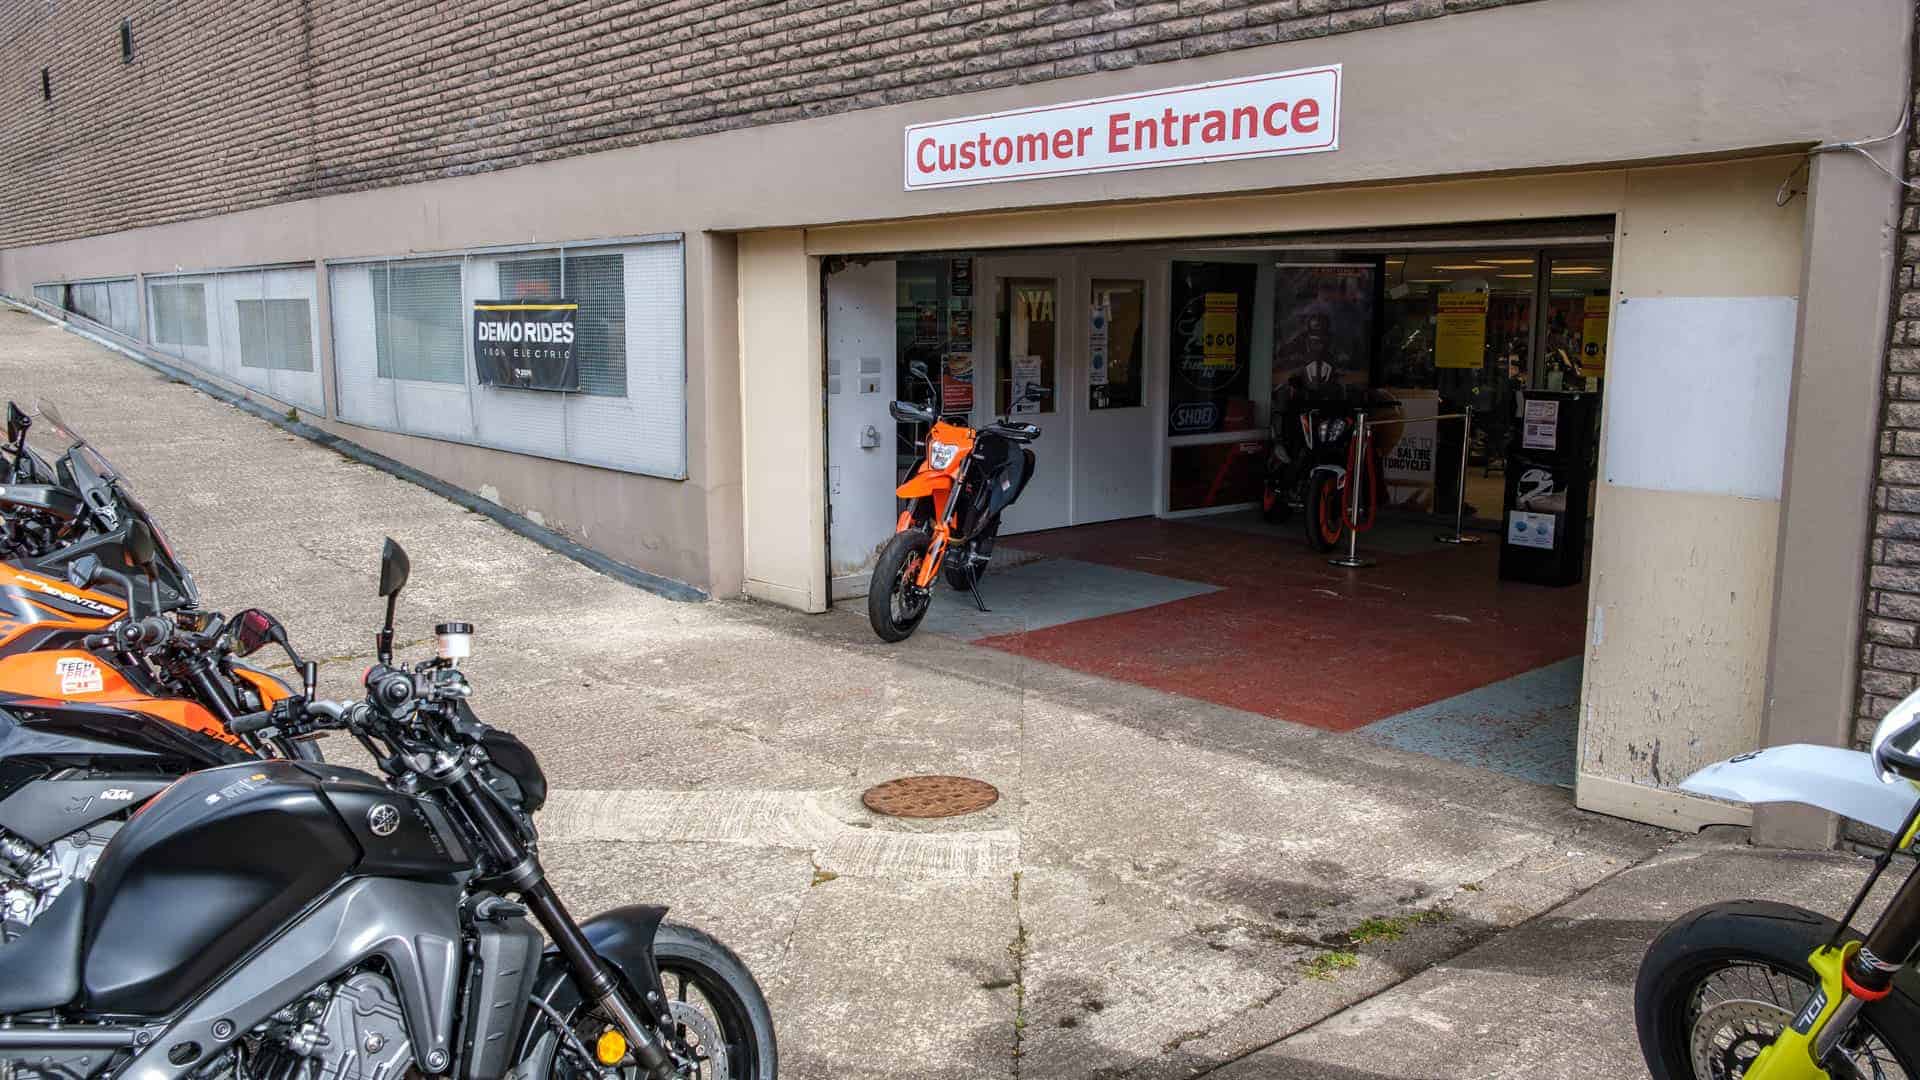 Image of customer entrance with motorcycles